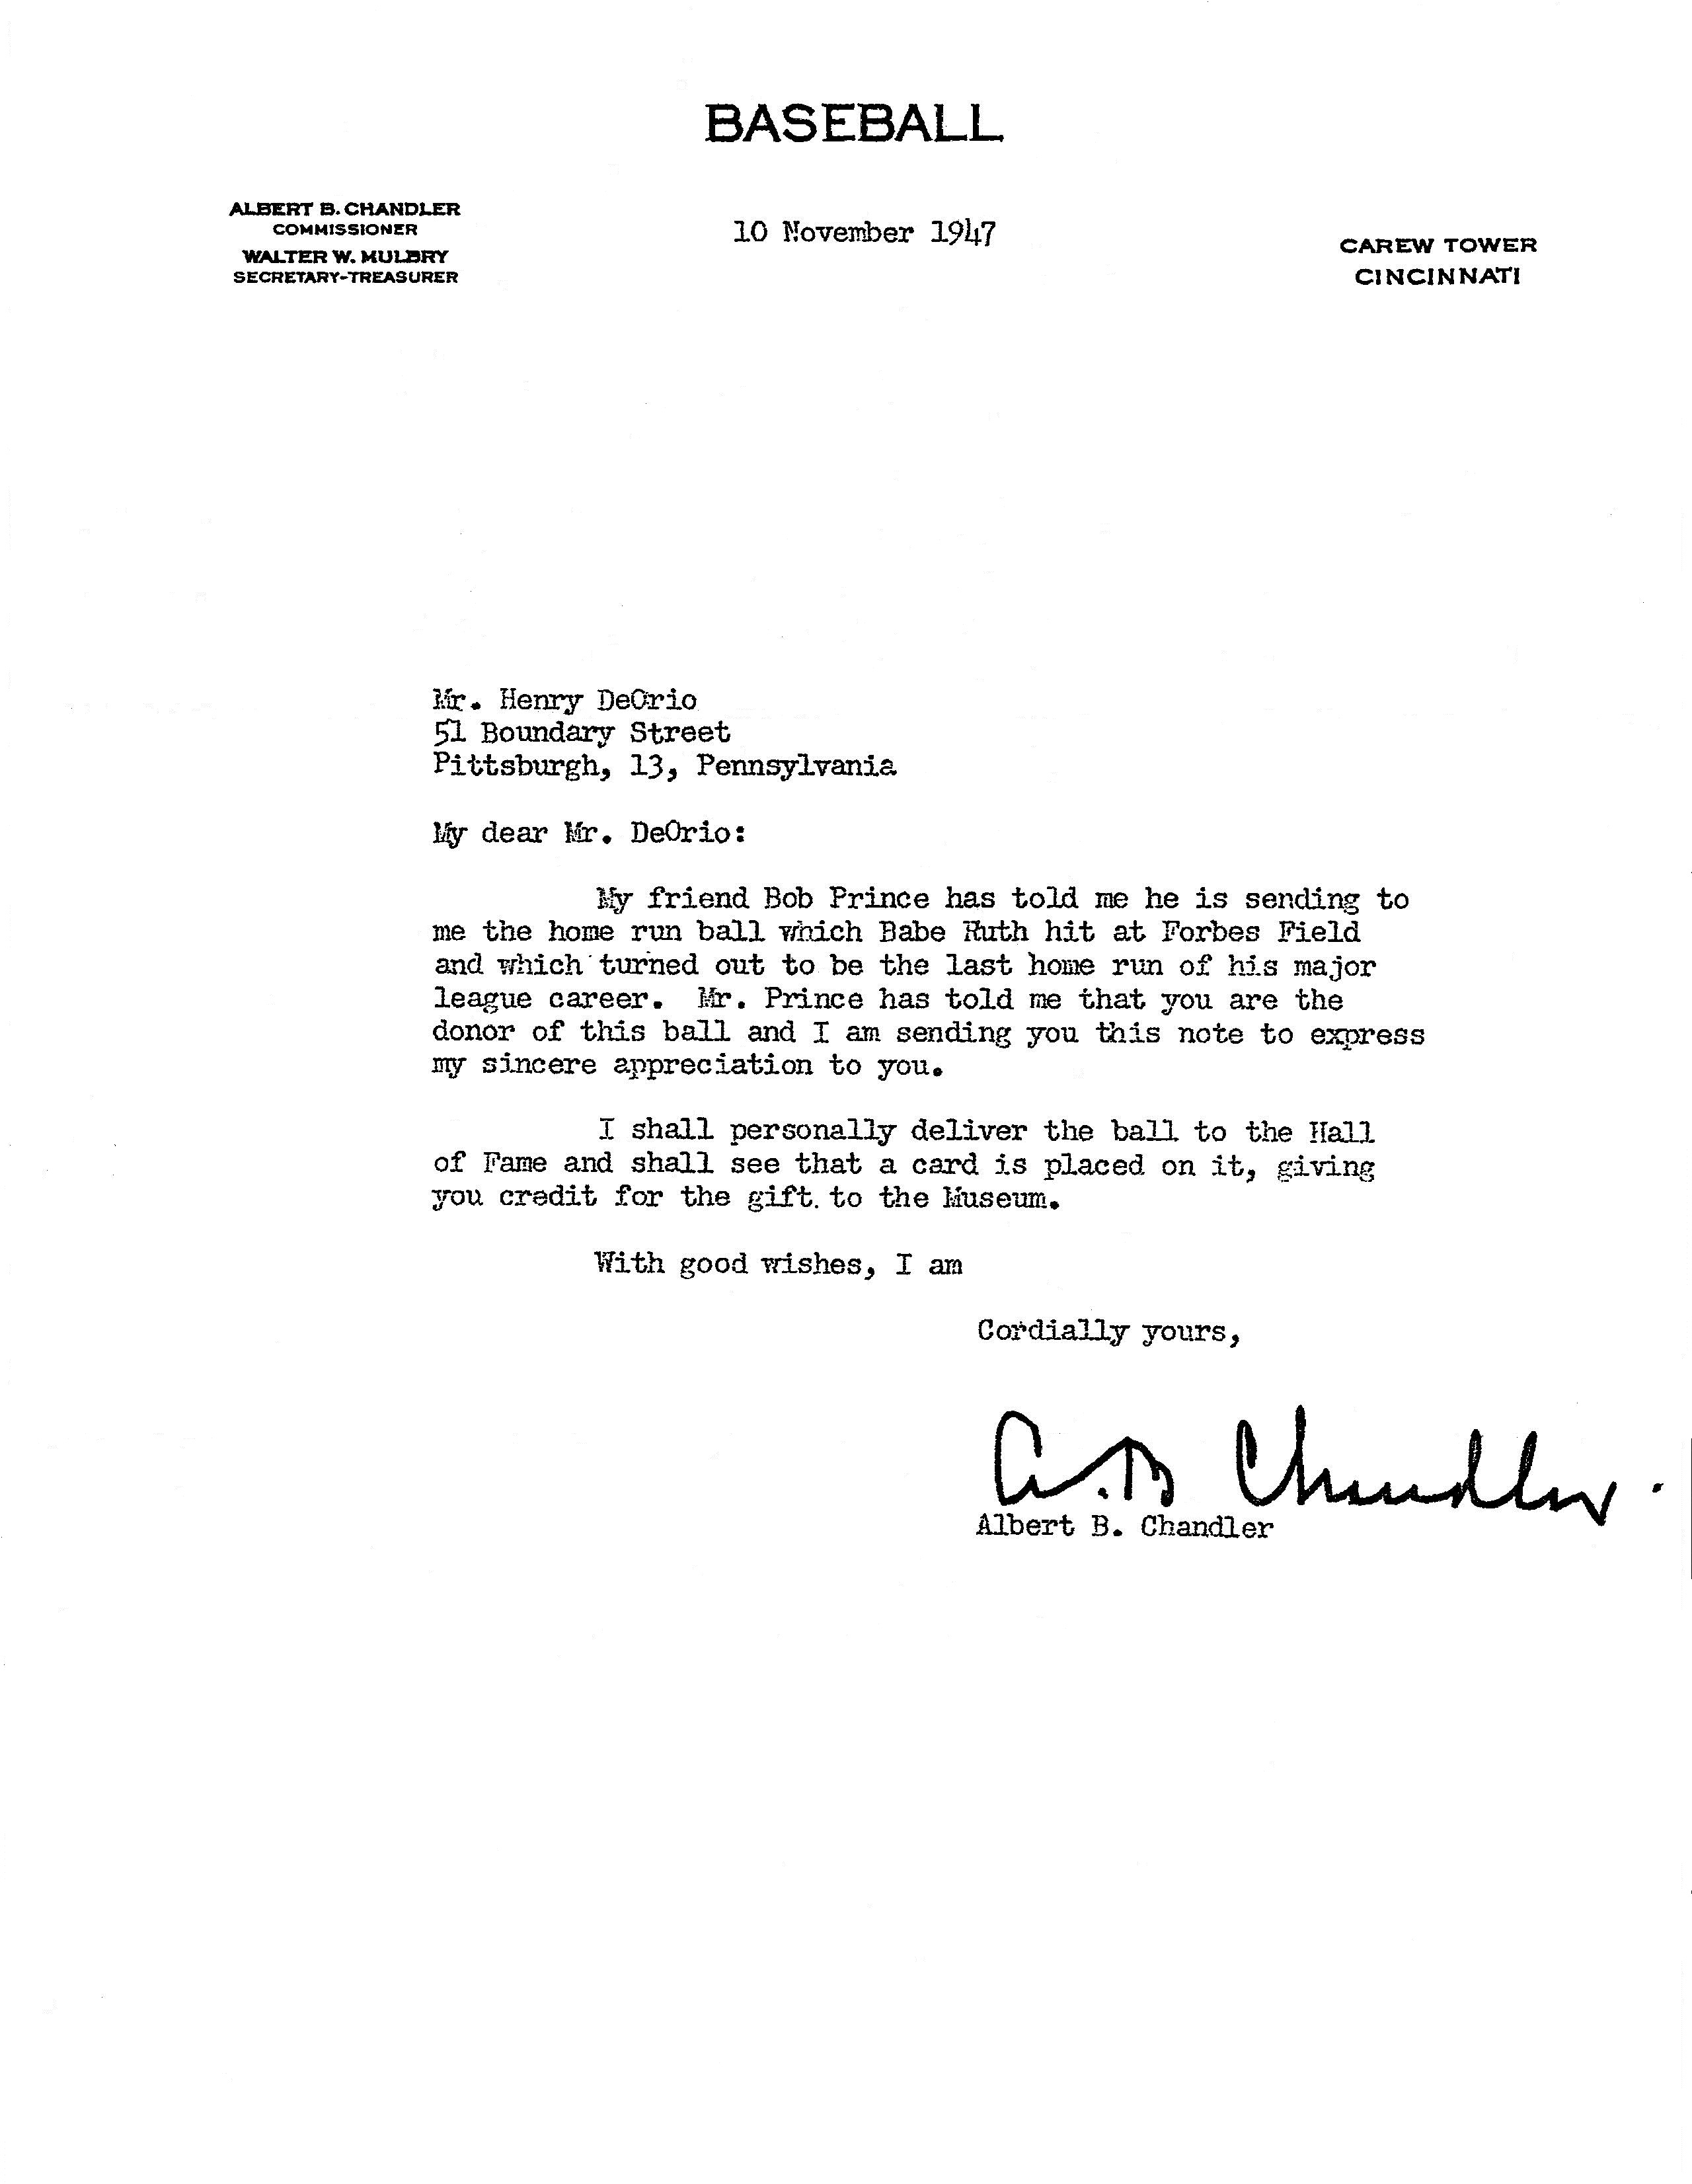 Commissioner of Baseball Letter to Wiggy DeOrio